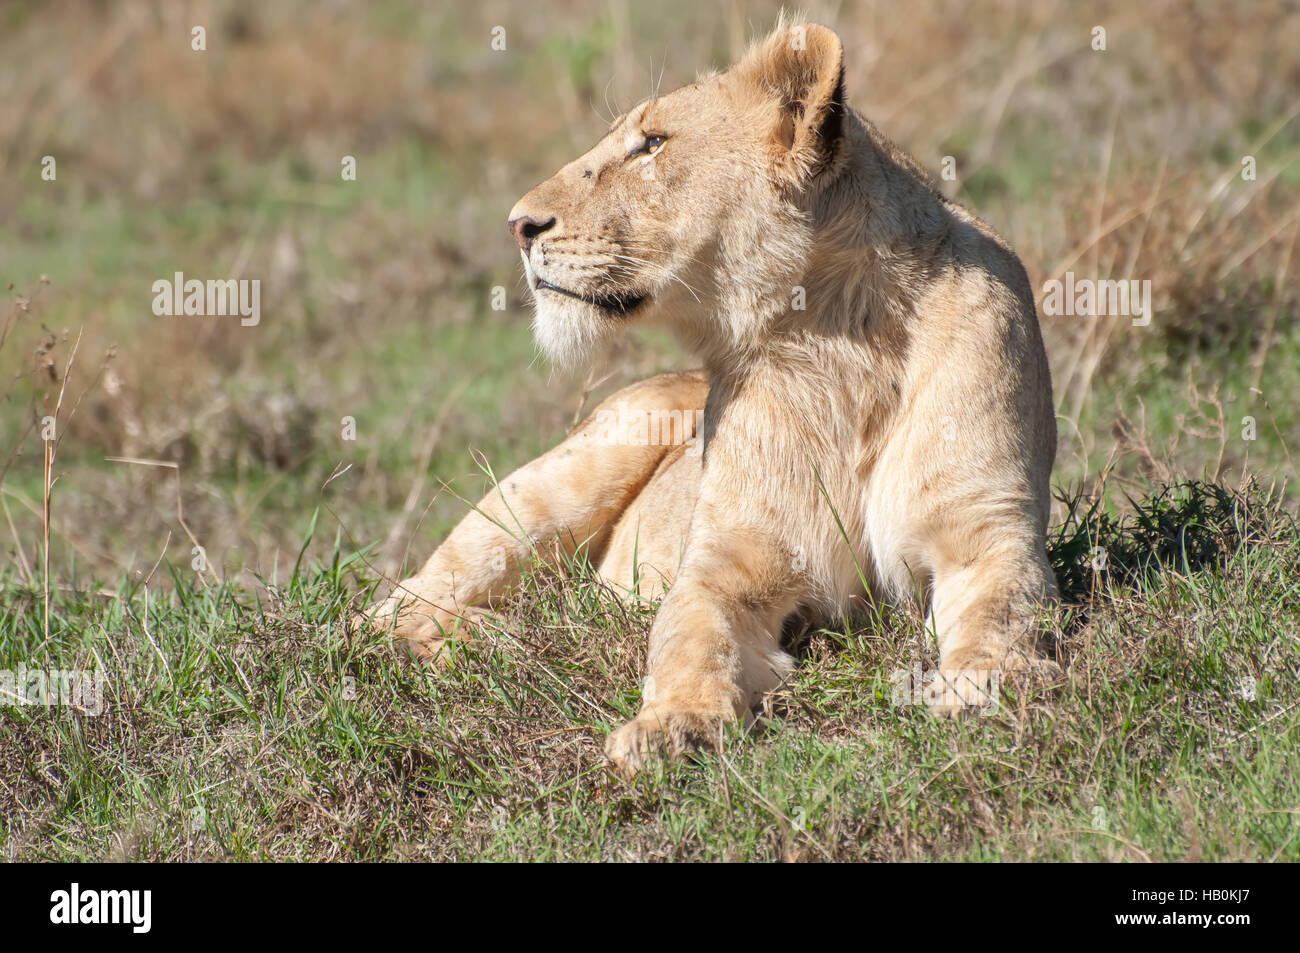 Lioness Up Close in Short Grass Stock Photo